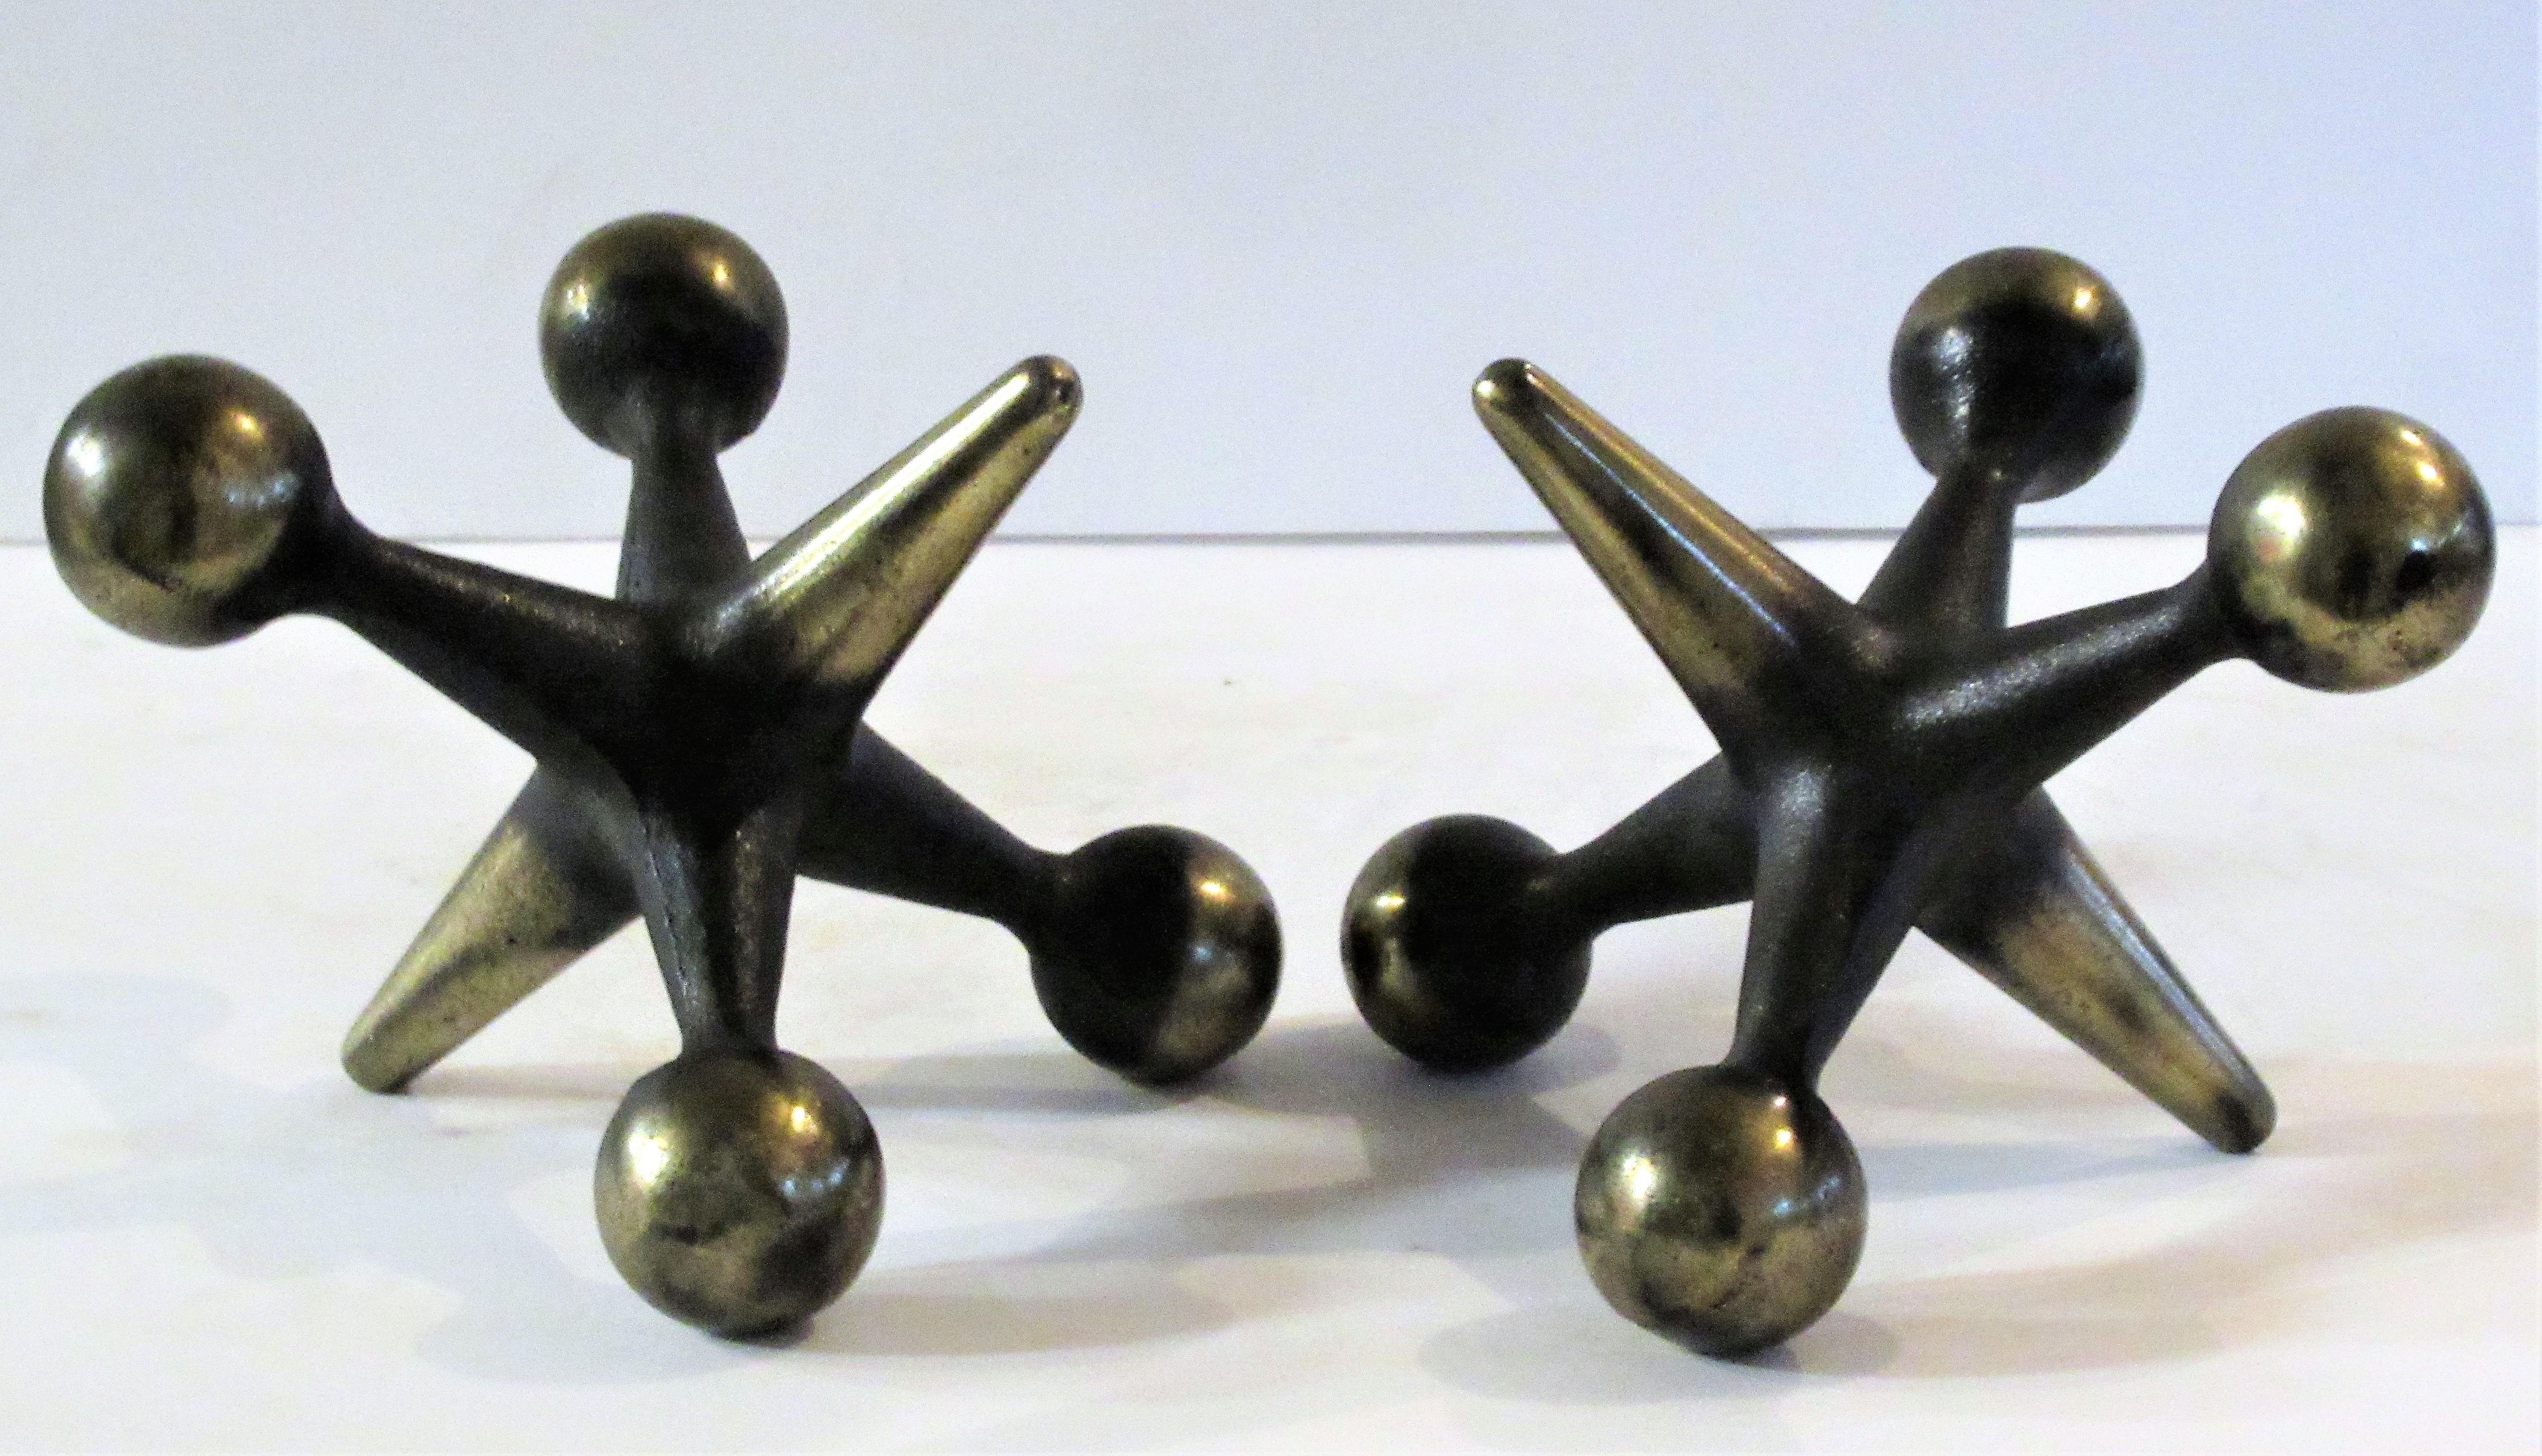 Vintage pair of Bill Curry Design Line jacks bookend sculptures in beautifully aged original plated brass and blackened iron surface, circa 1960's. Look at all pictures and read condition report in comment section.